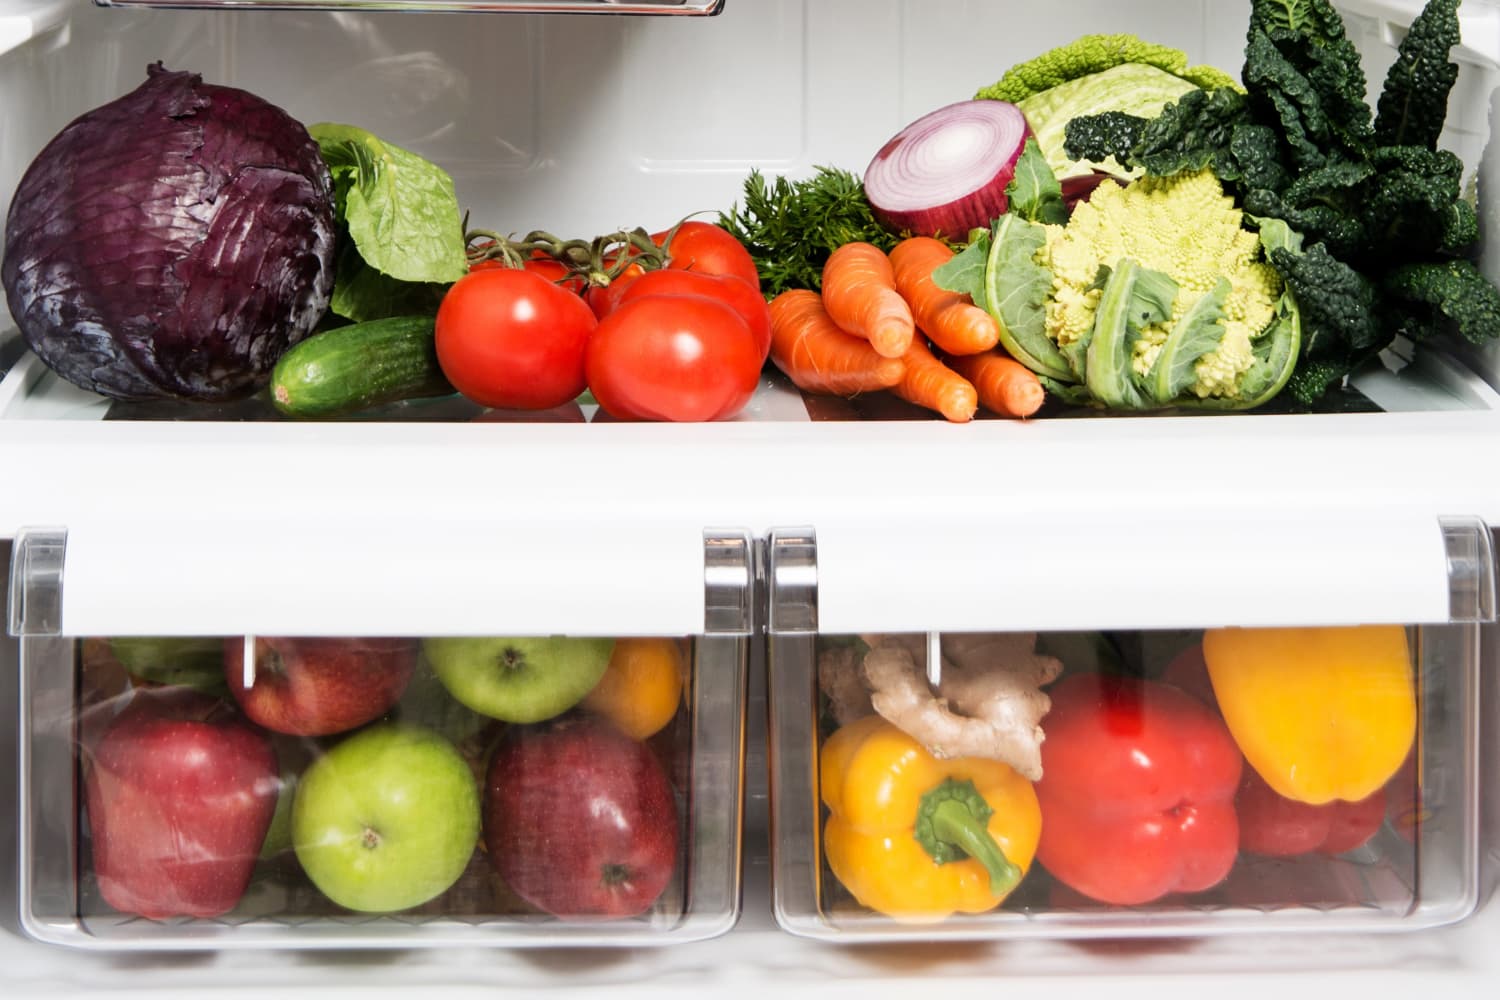 3 Questions That Keep My Crisper Drawers Organized & Healthy | The Kitchn